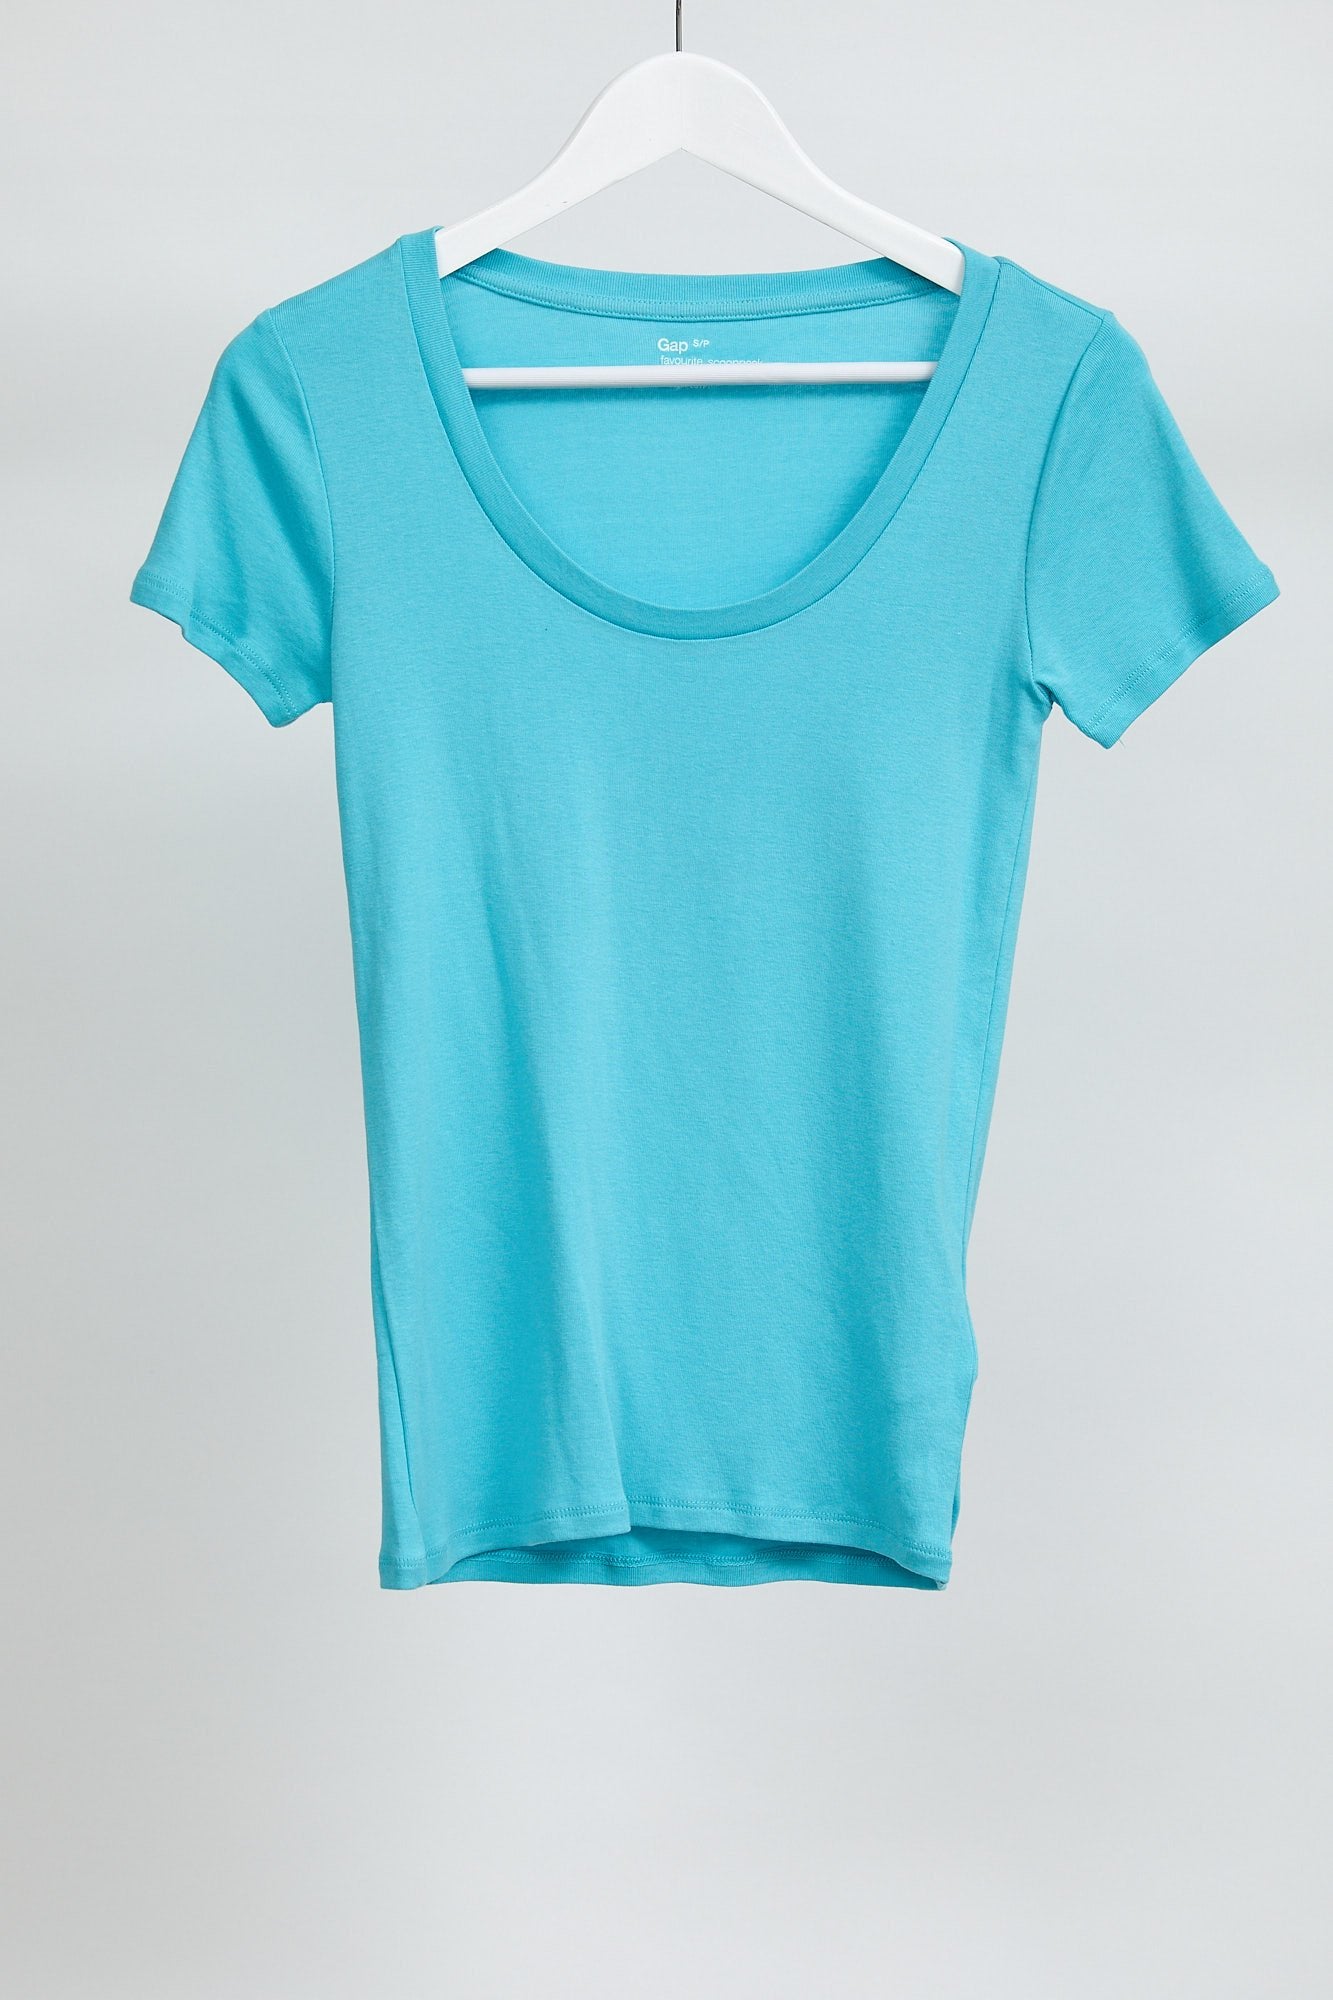 Womens Blue Short Sleeve Top: Size Small